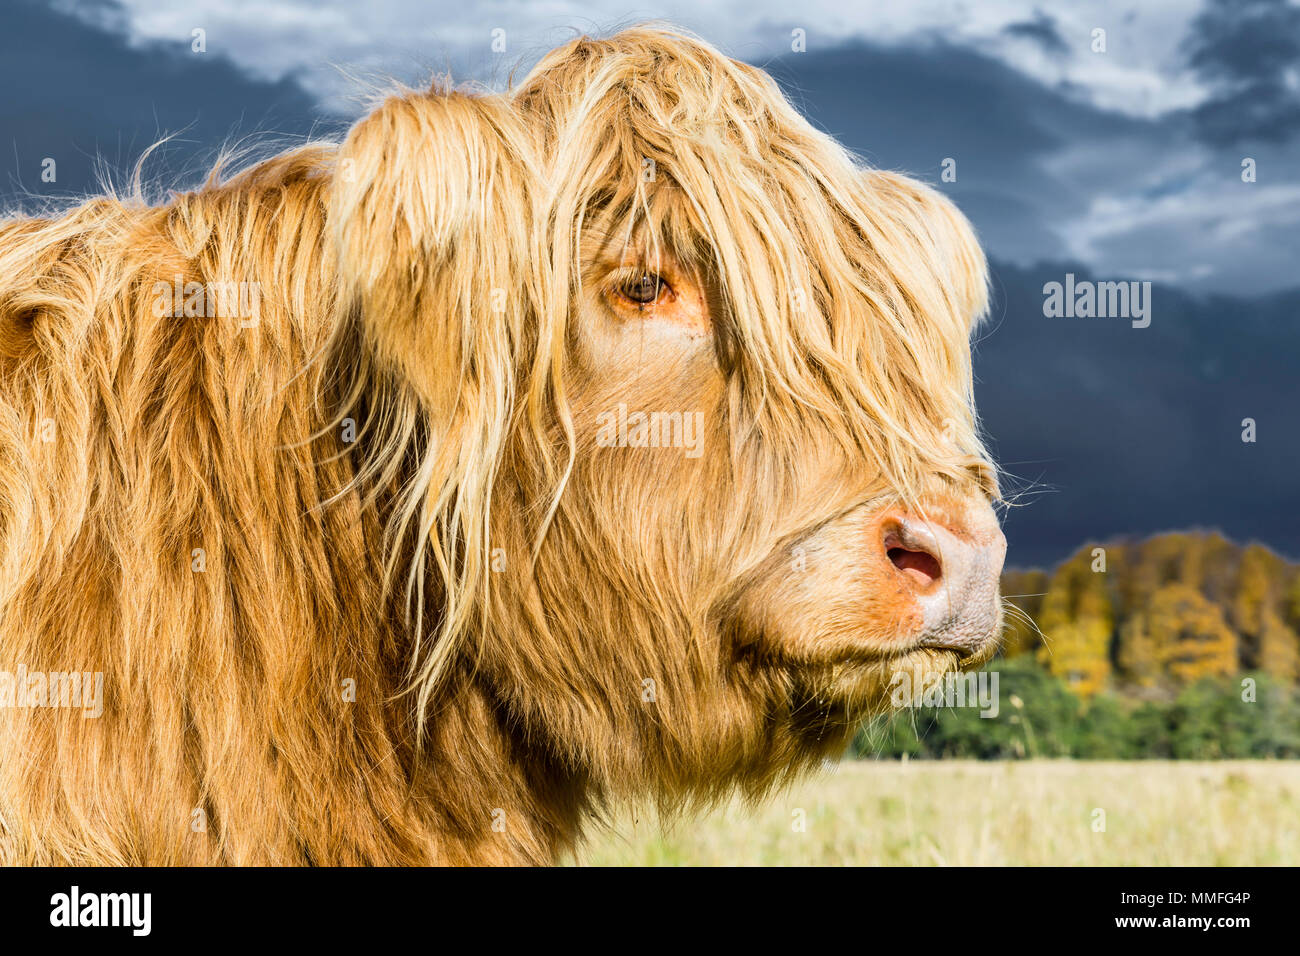 The Highland Cow or coo as it is known is a large hairy and somewhat cute animal. Quite docile on a warmish day! Stock Photo